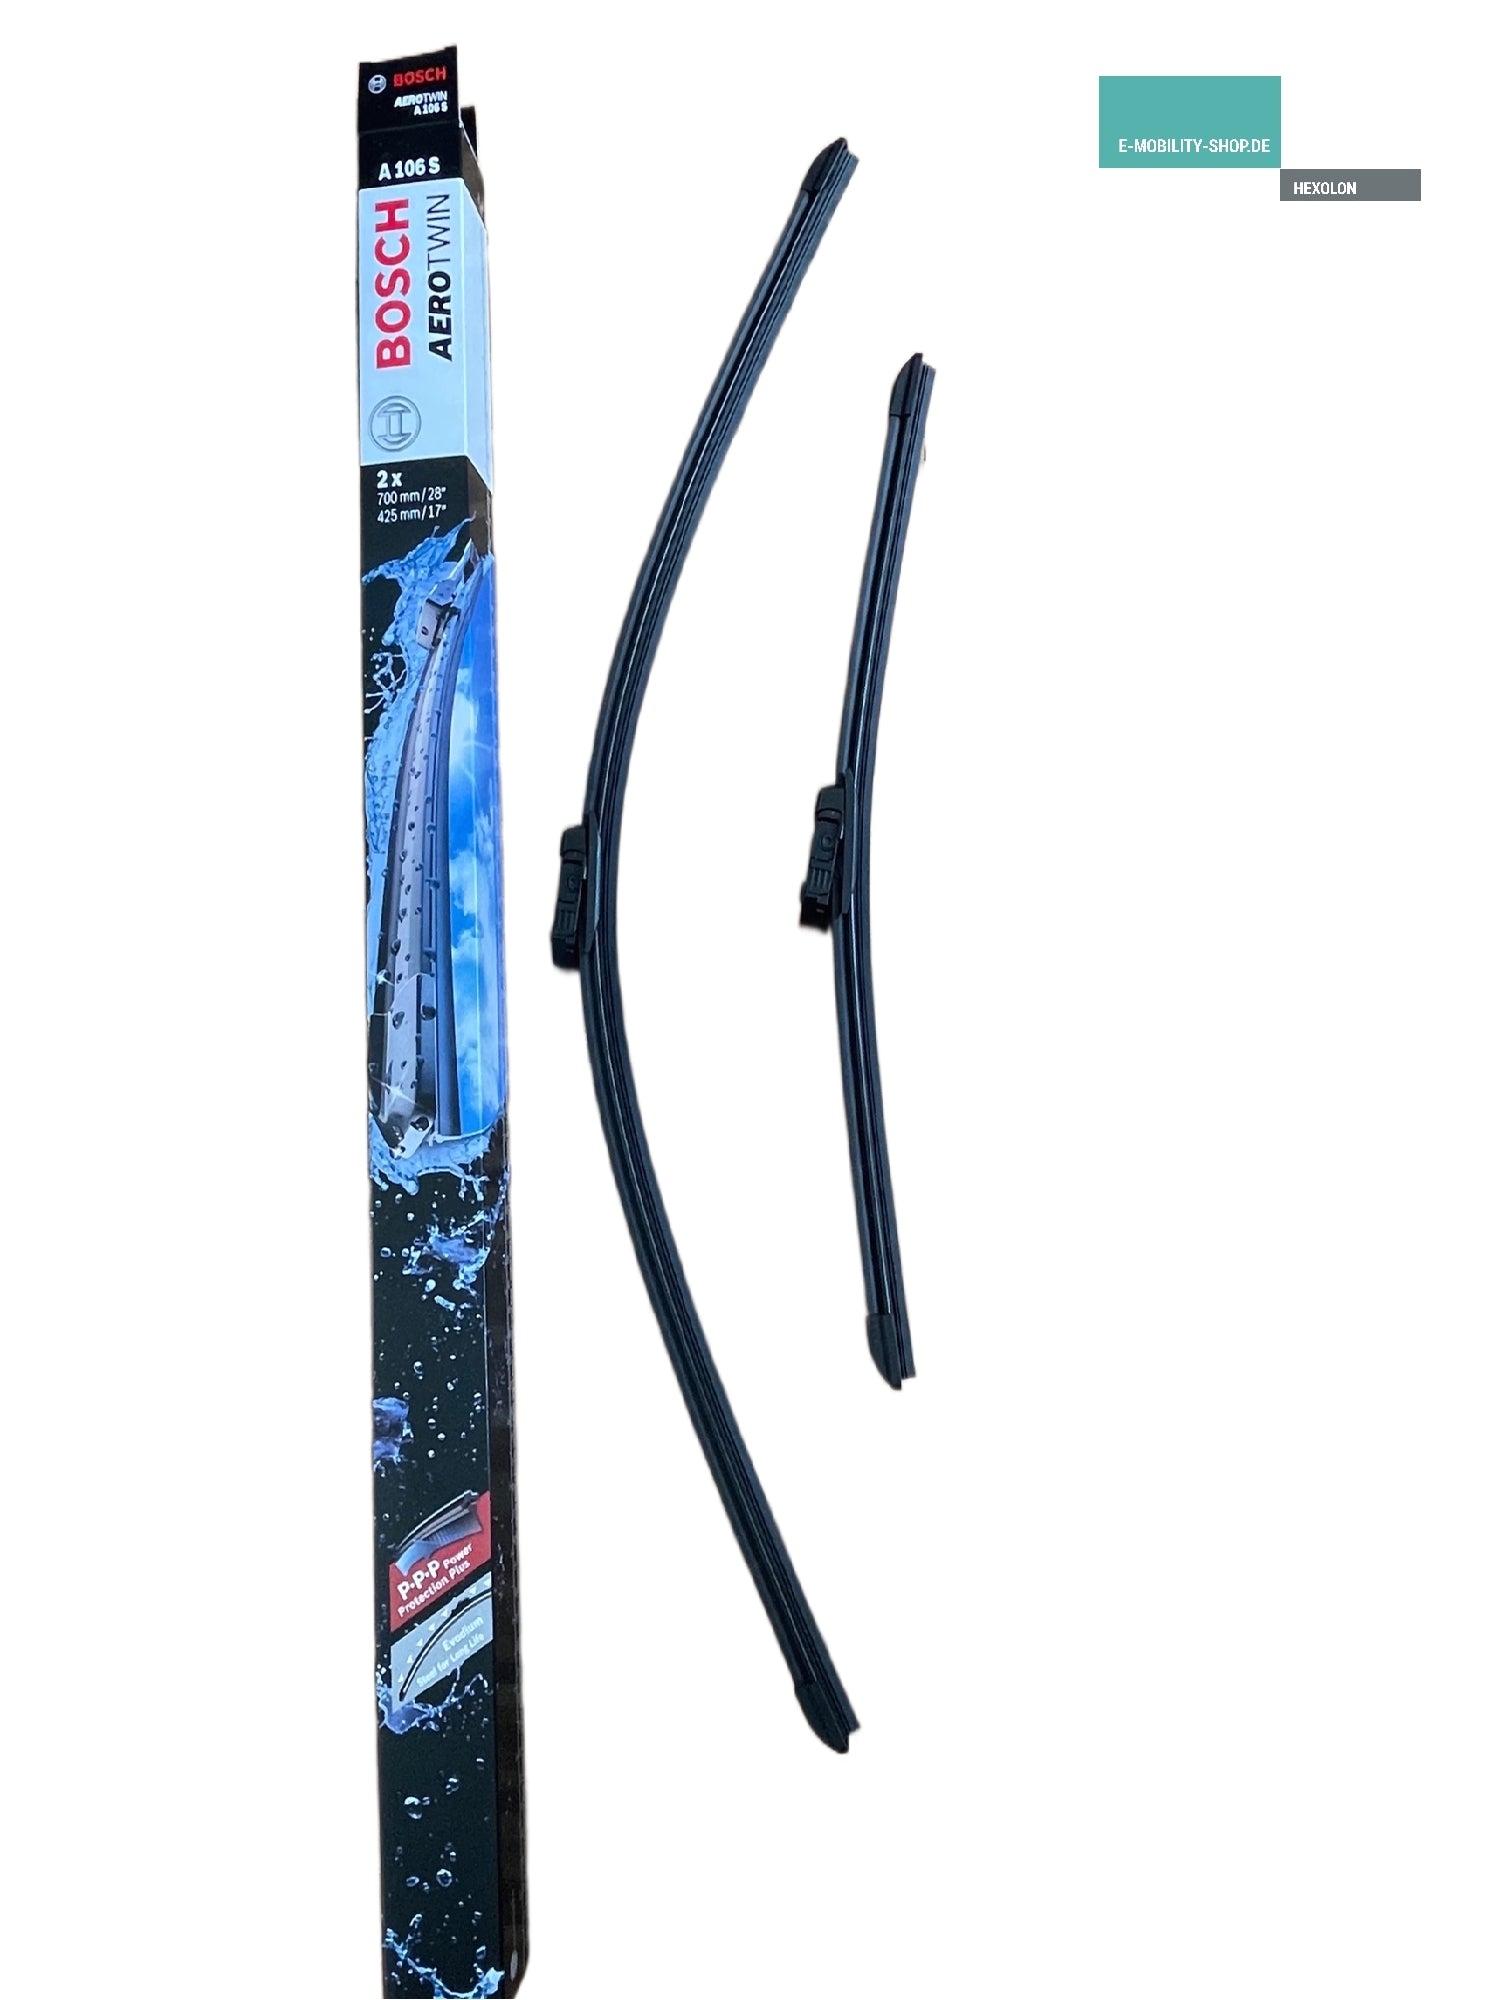 BOSCH AeroTwin A 106 S - Wiper blades for Tesla Model S - 1 pair of wi –  E-Mobility Shop